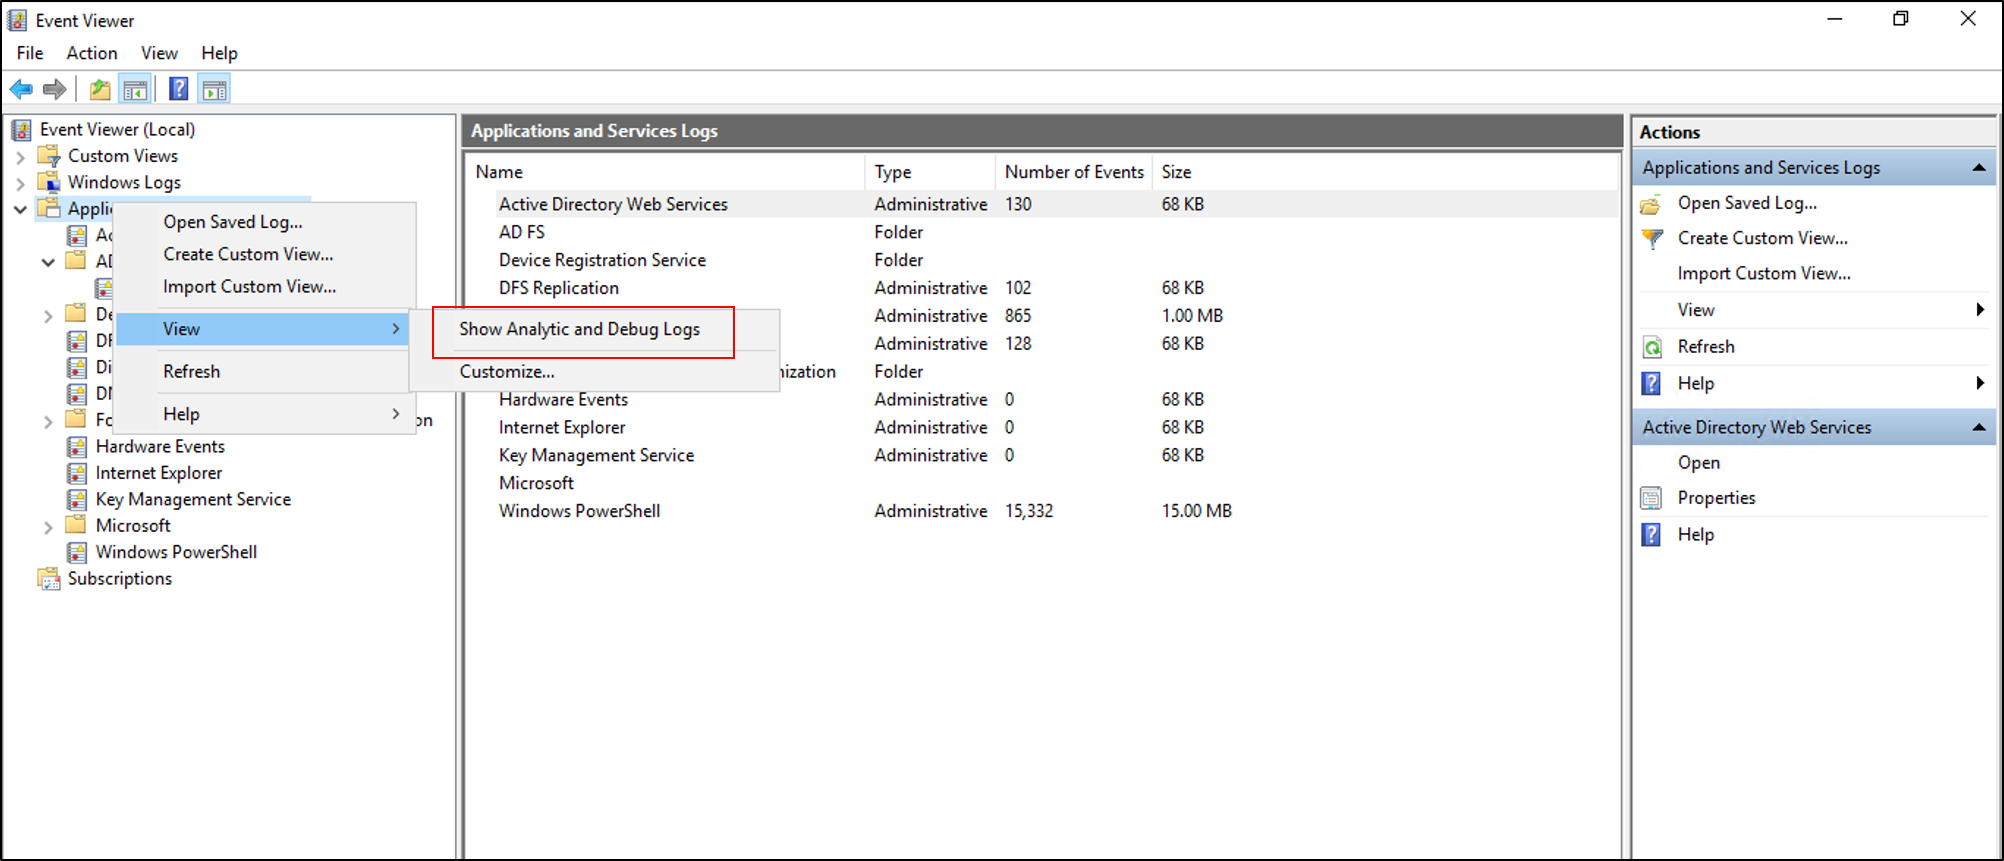 Screenshot of the Event Viewer showing that the user right-clicked Applications and Services Log and selected View with the Show Analytic and Debug Logs option called out.